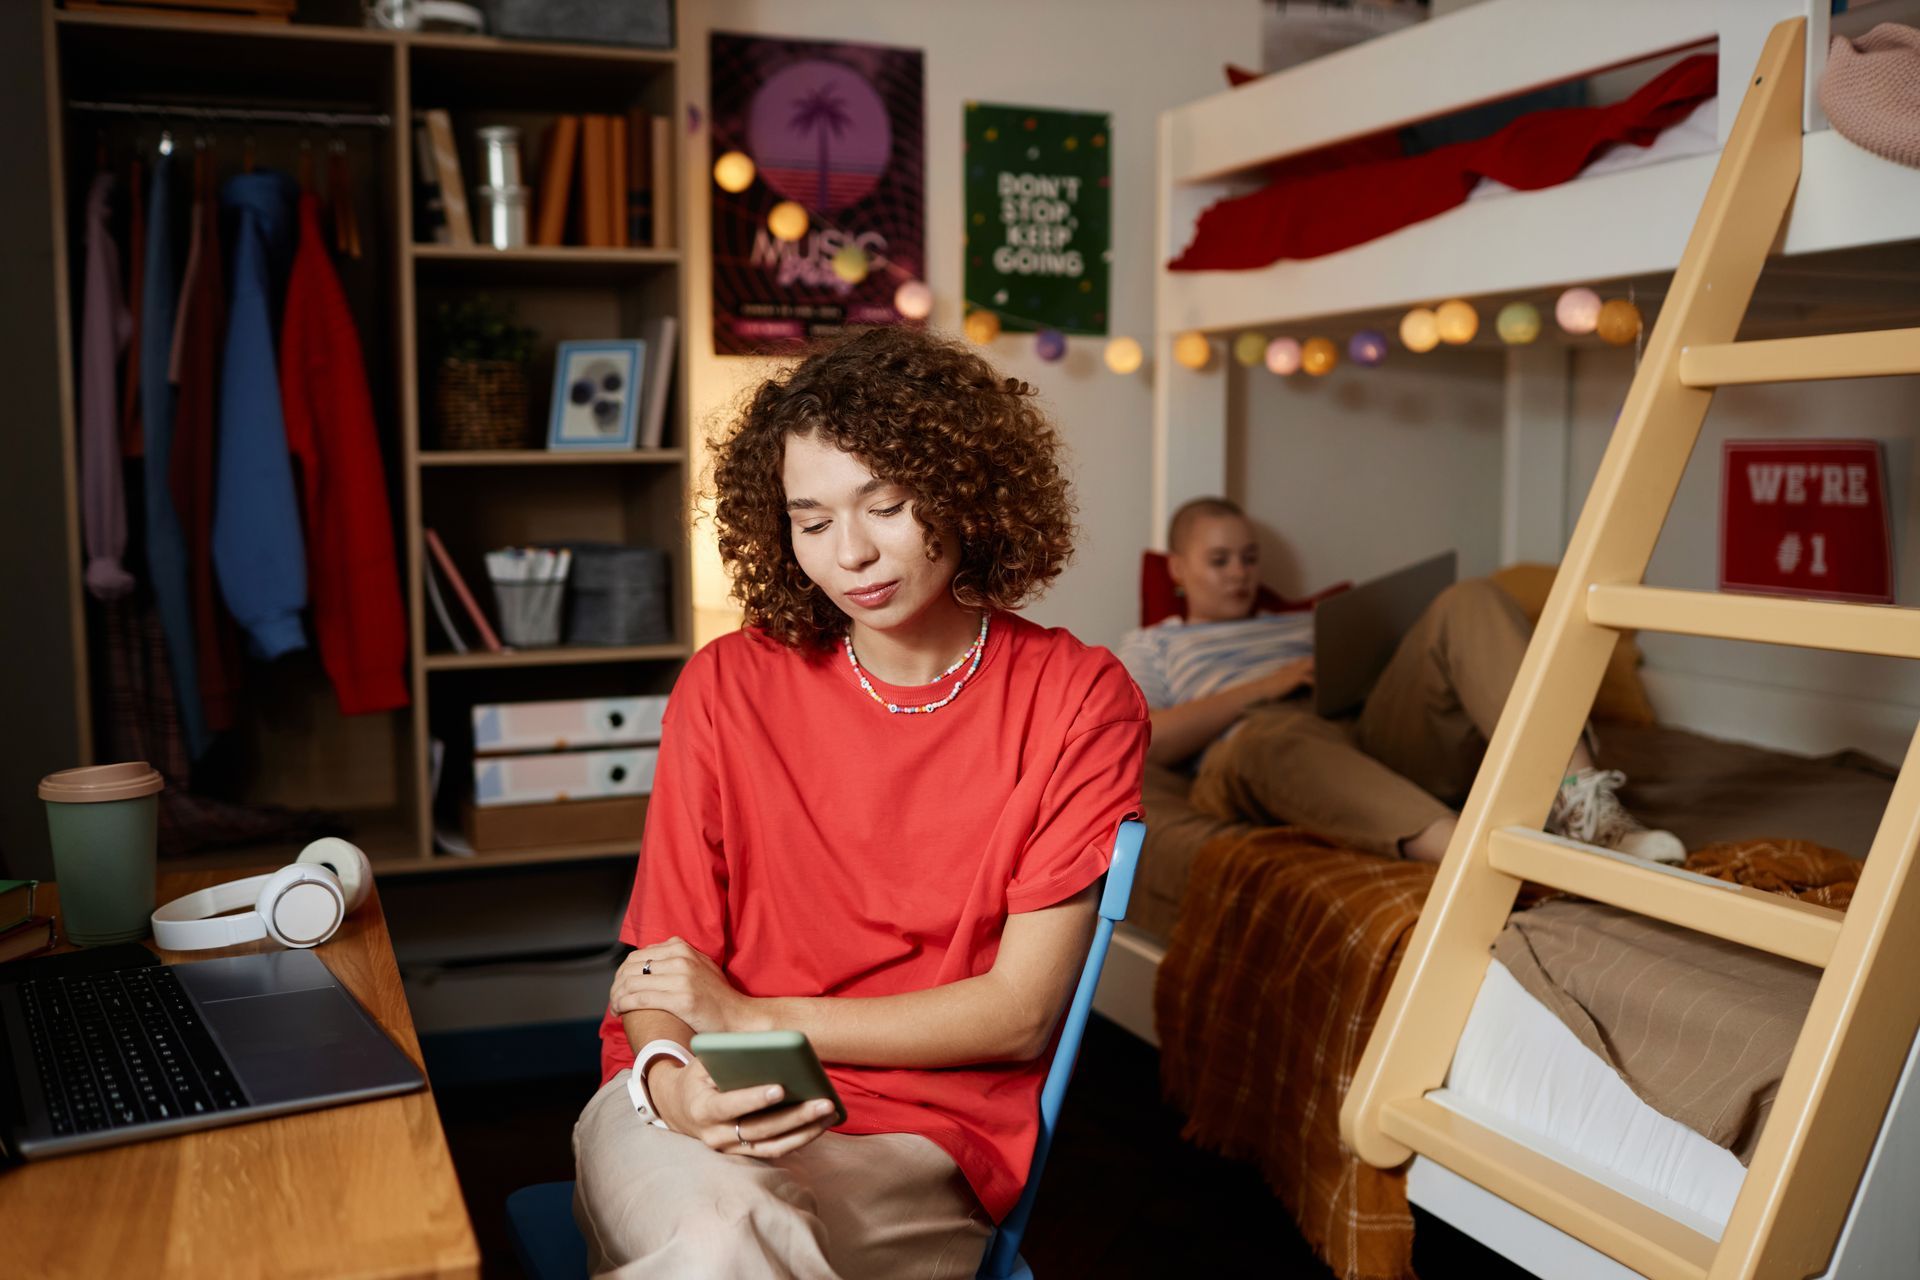 curly haired young woman using smartphone in college residence hall with bulk internet